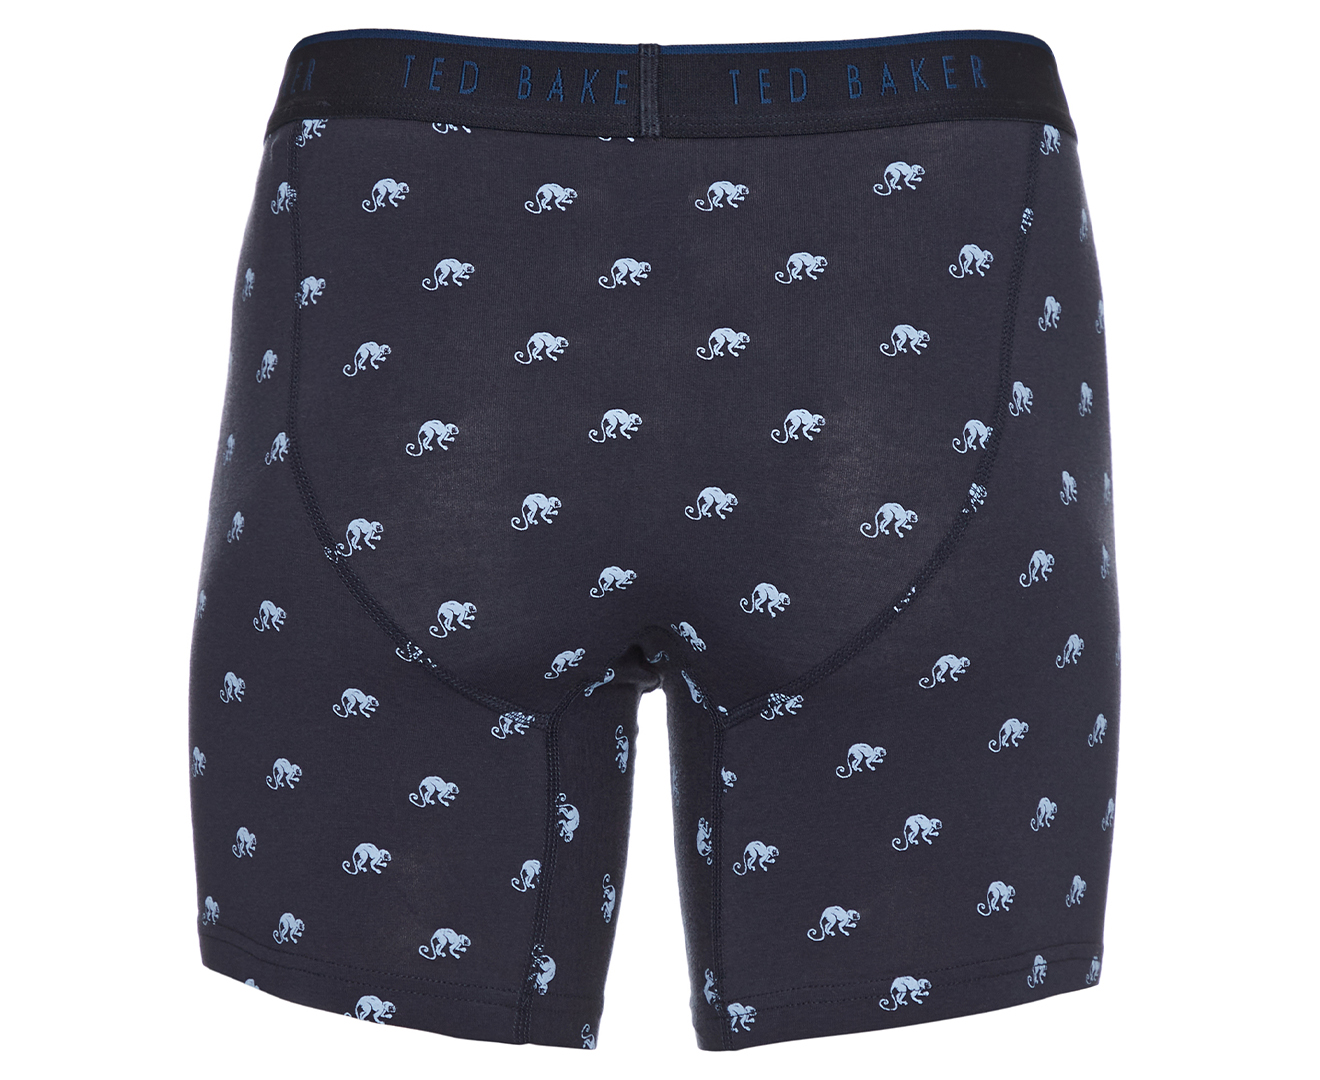 Ted Baker Men's Cotton Stretch Boxer Briefs 3-Pack - Navy Print/Grey ...